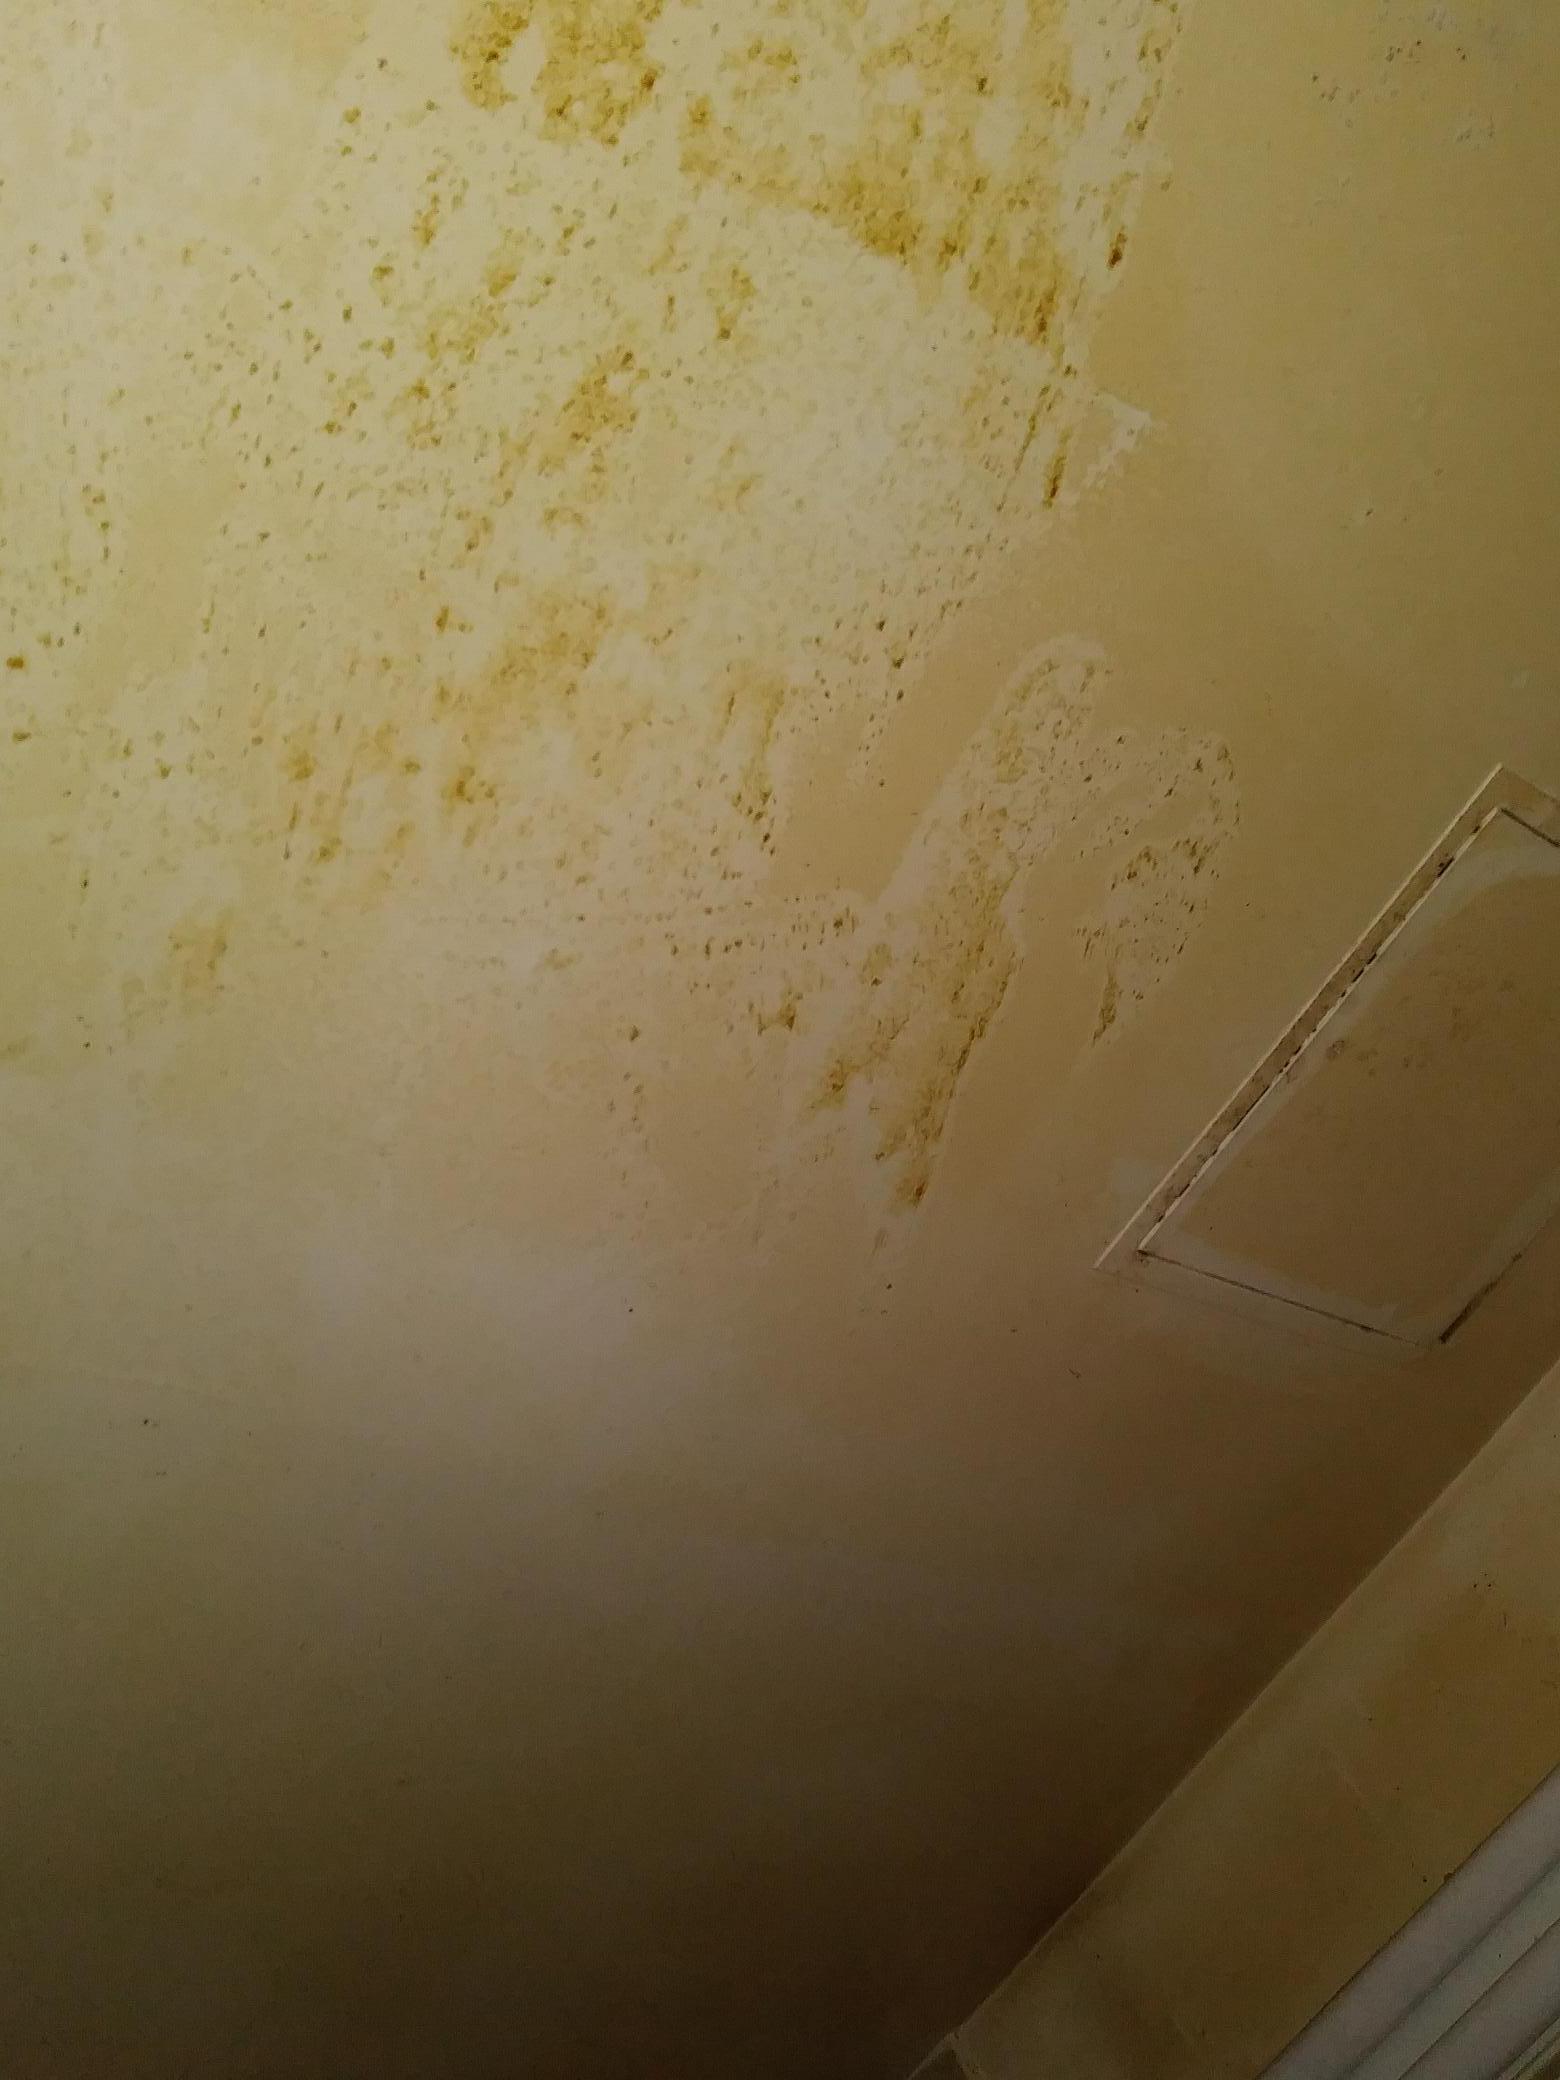 Check out our Water Damage Tips!